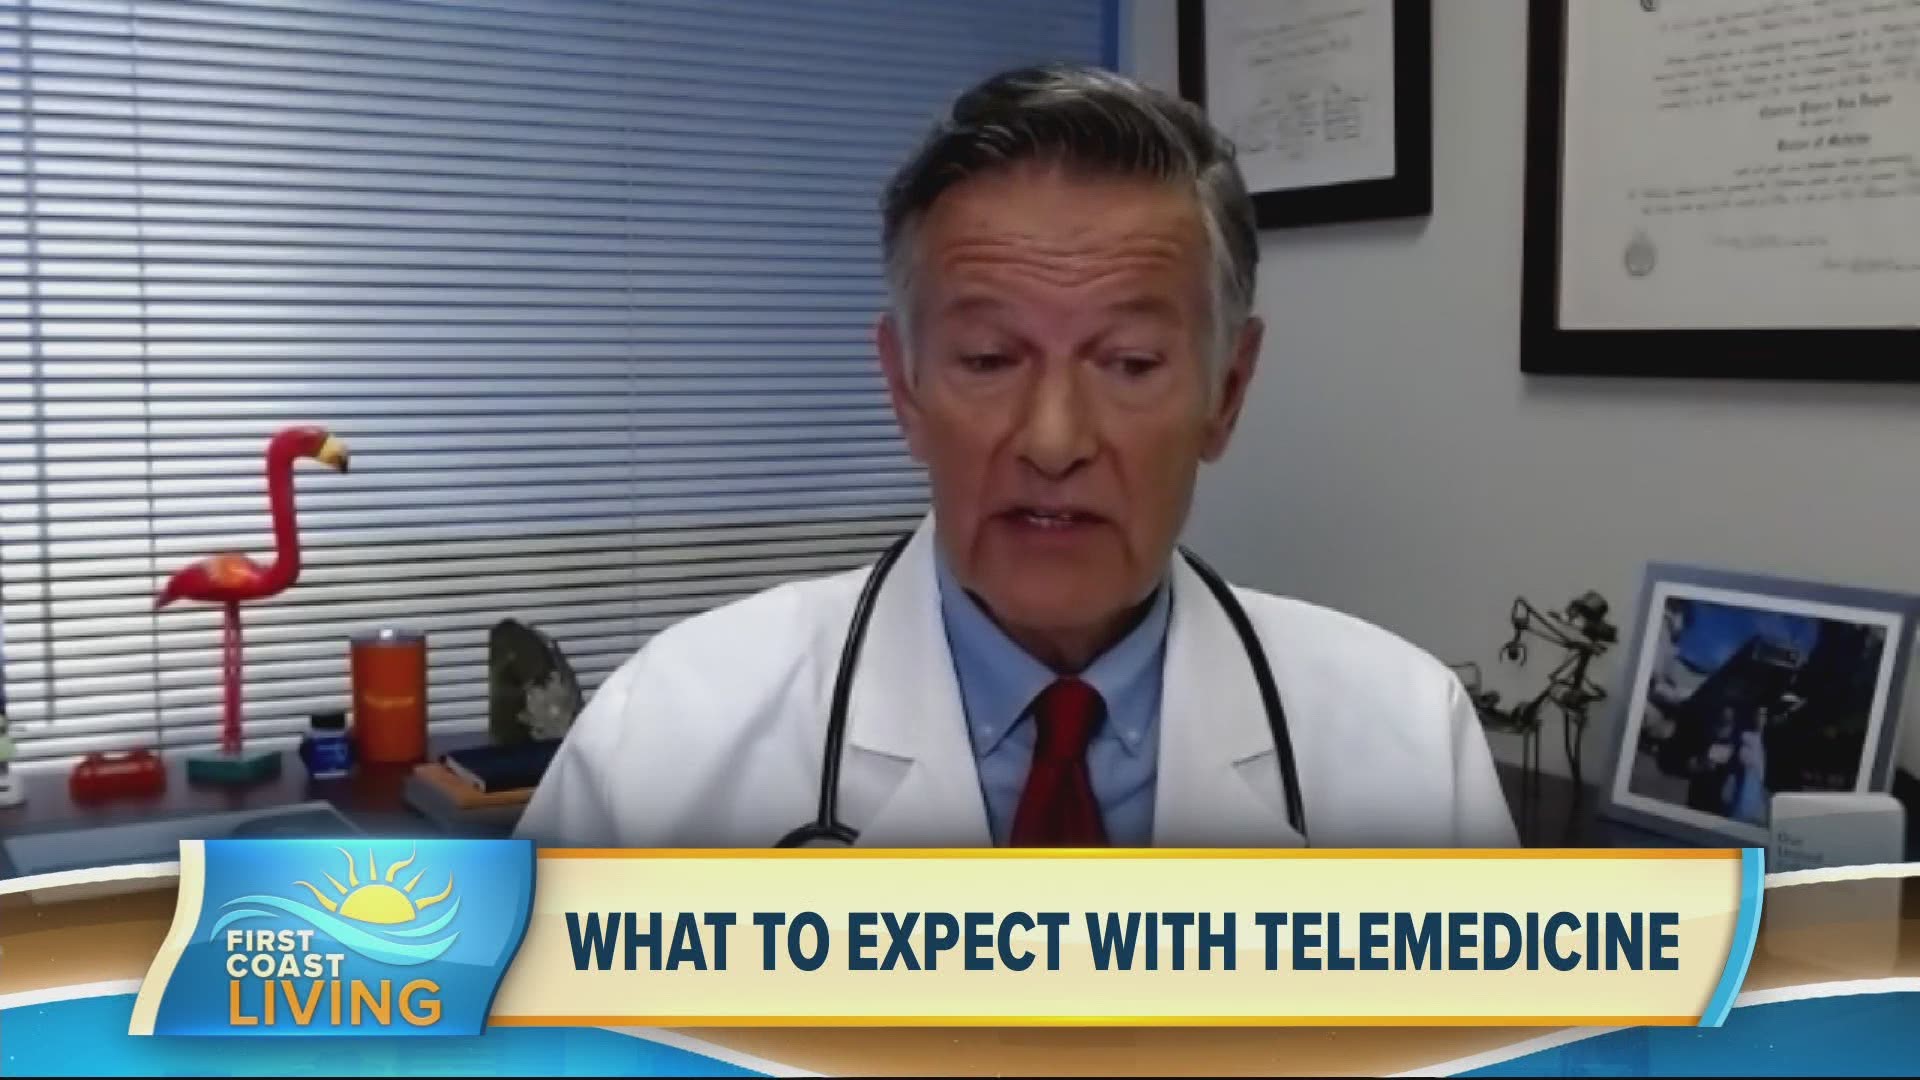 A doctor shares what people and patients can expect with Telemedicine.